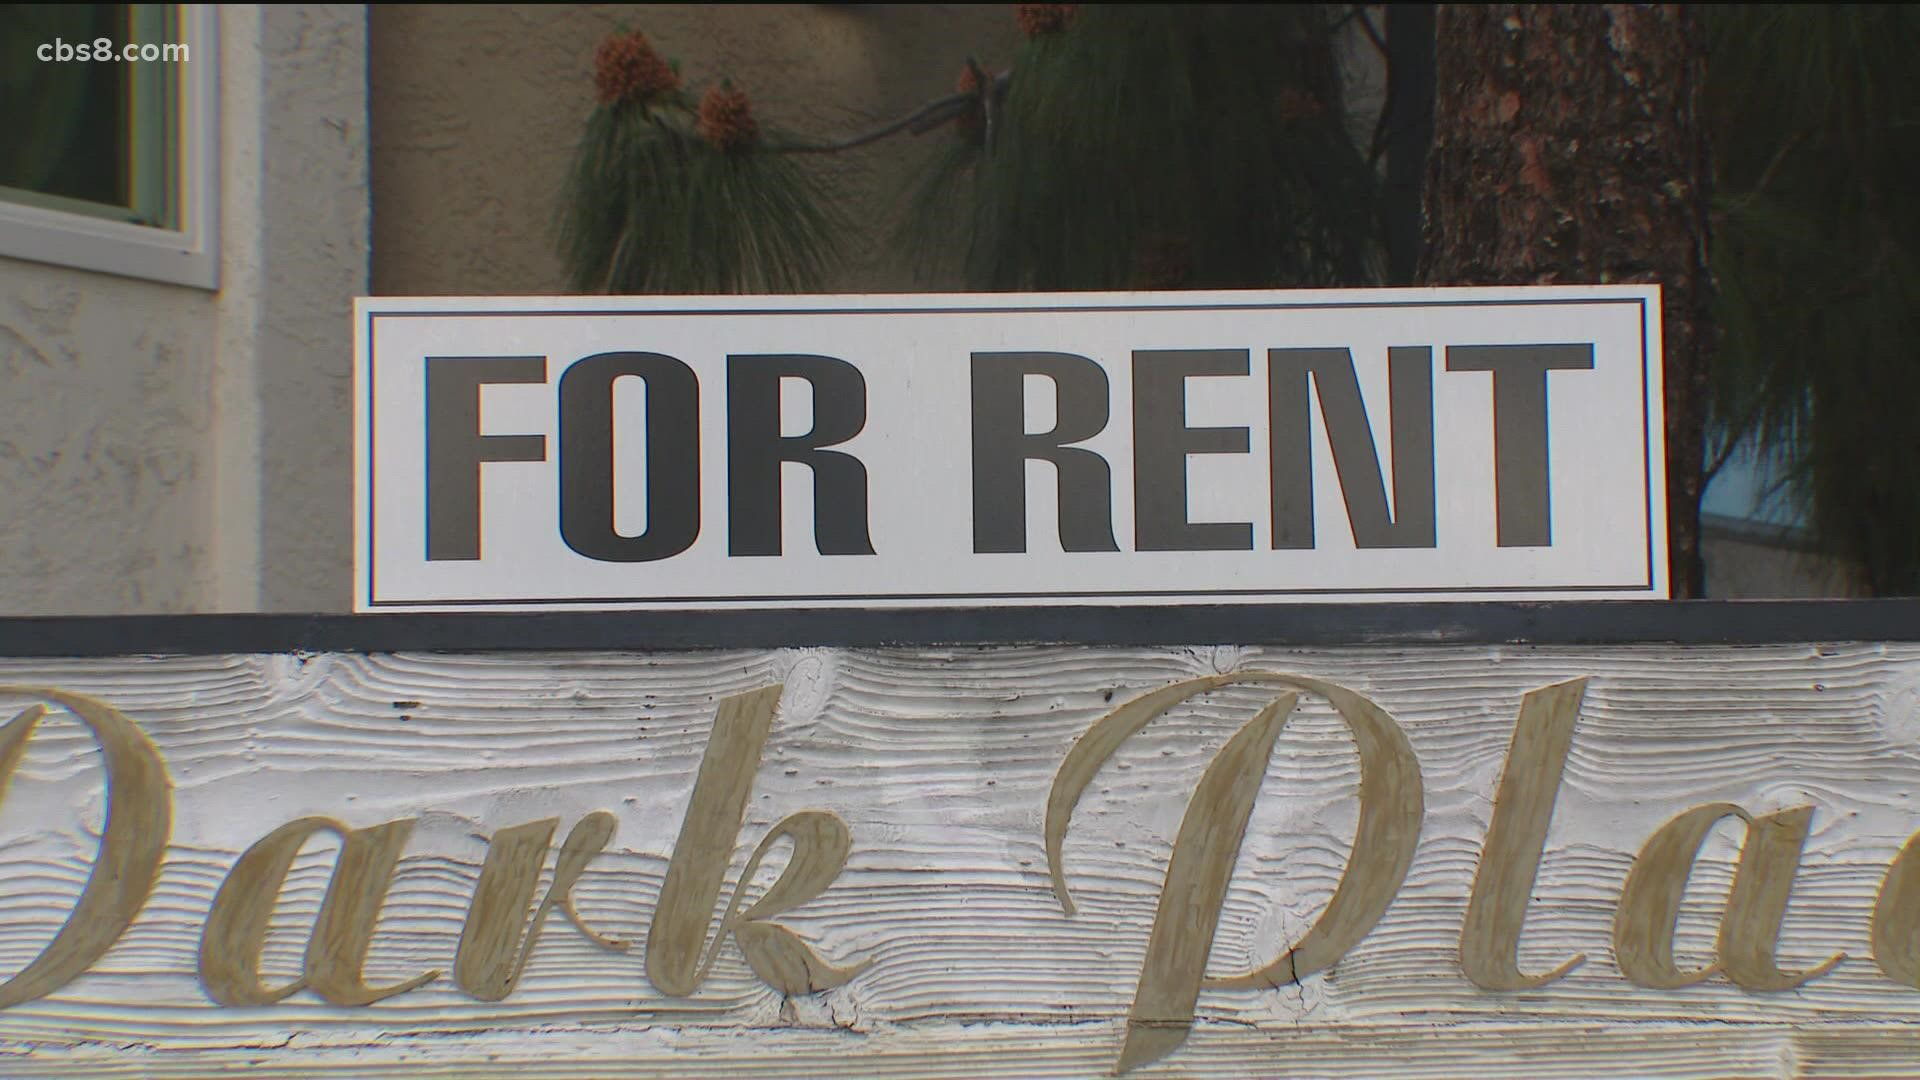 Up to 2.4 million Californians could qualify under this new bill. The current renter credit, now as low as $60, has remained the same for more than four decades.